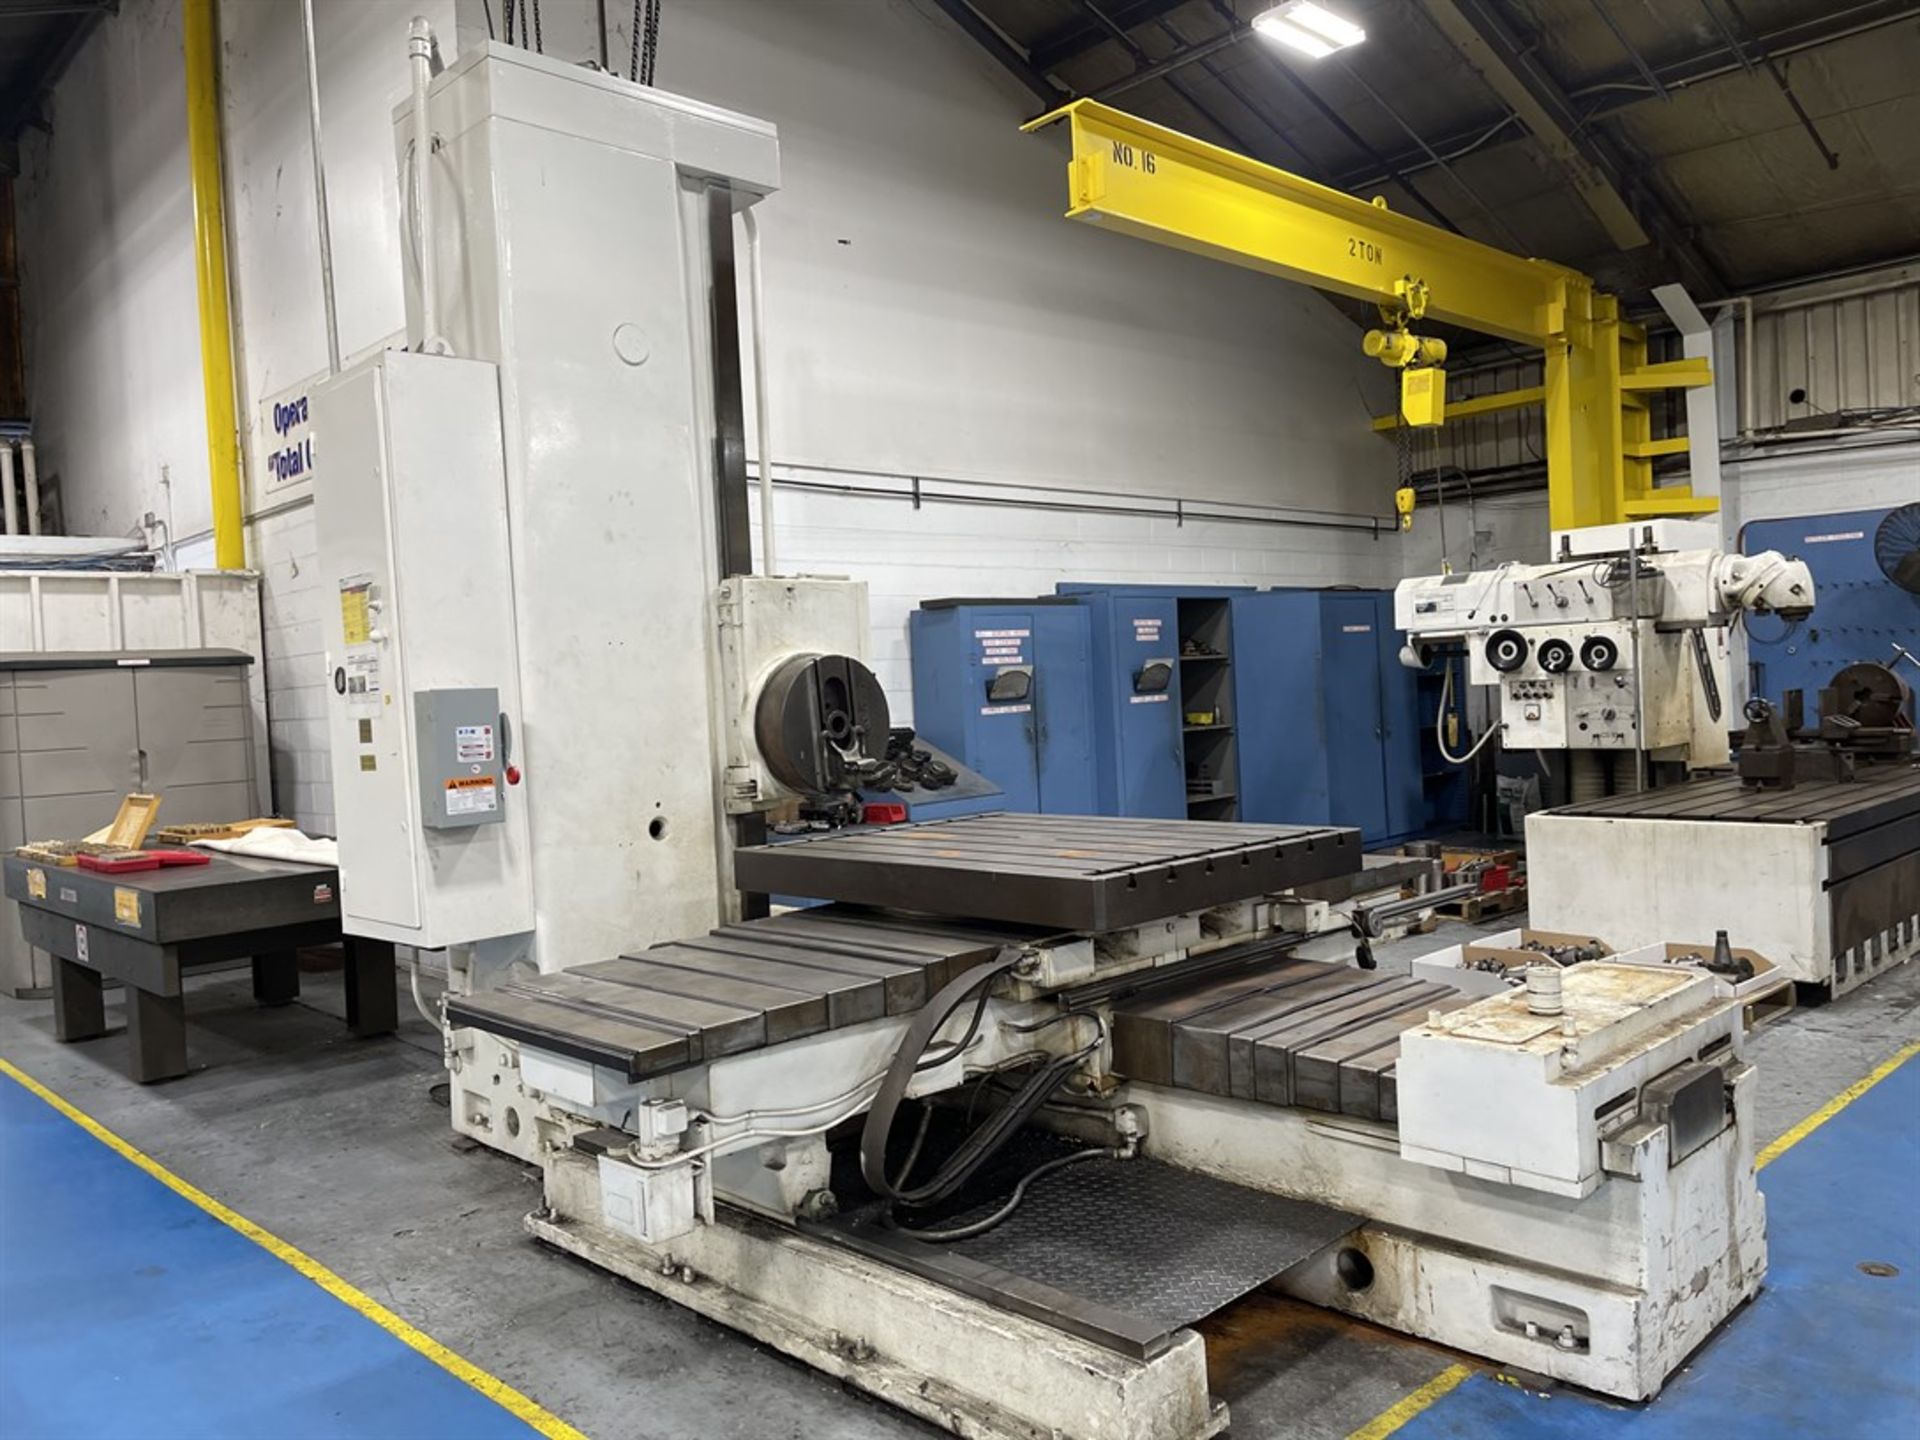 SUMMIT 4" Horizontal Boring Mill, s/n 575, 48" x 60" Table, Y-72", 20" Facing Head, 17-1180 RPM - Image 8 of 9